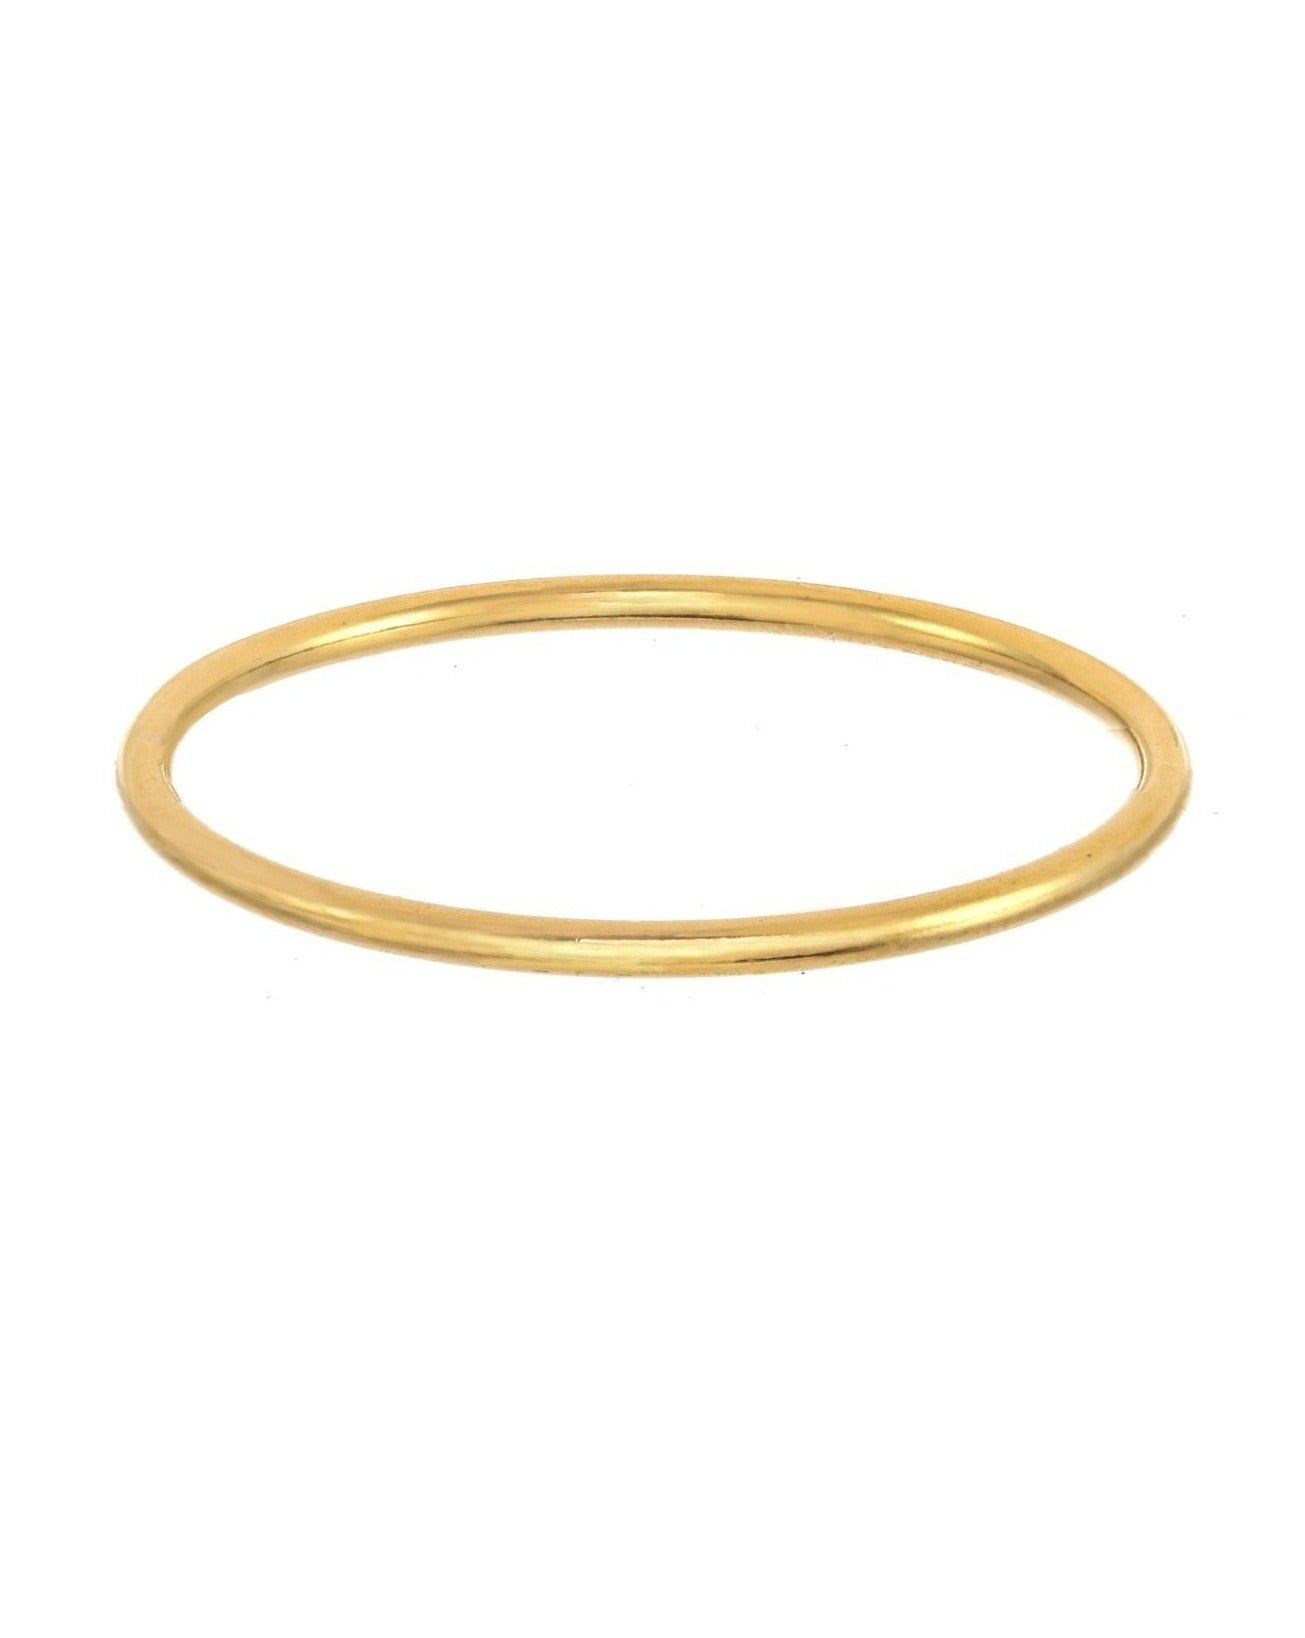 Casual Ring by KOZAKH. A 1mm thick round ring crafted in 14K Gold Filled.